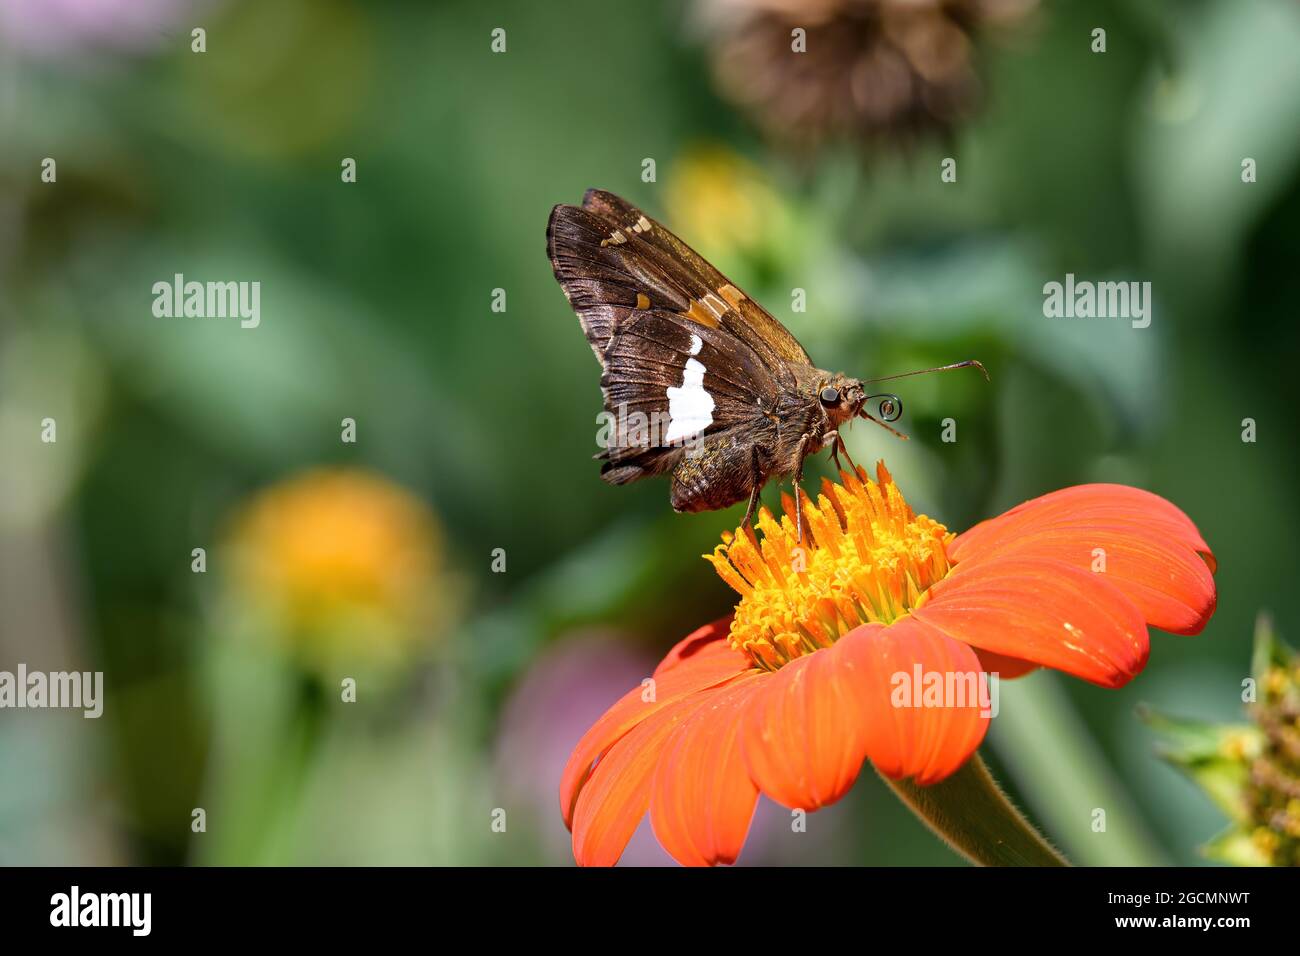 Silver-spotted skippers feeding on Tithonia flower. Epargyreus clarus, the silver-spotted skipper, is a butterfly of the family Hesperiidae. Stock Photo